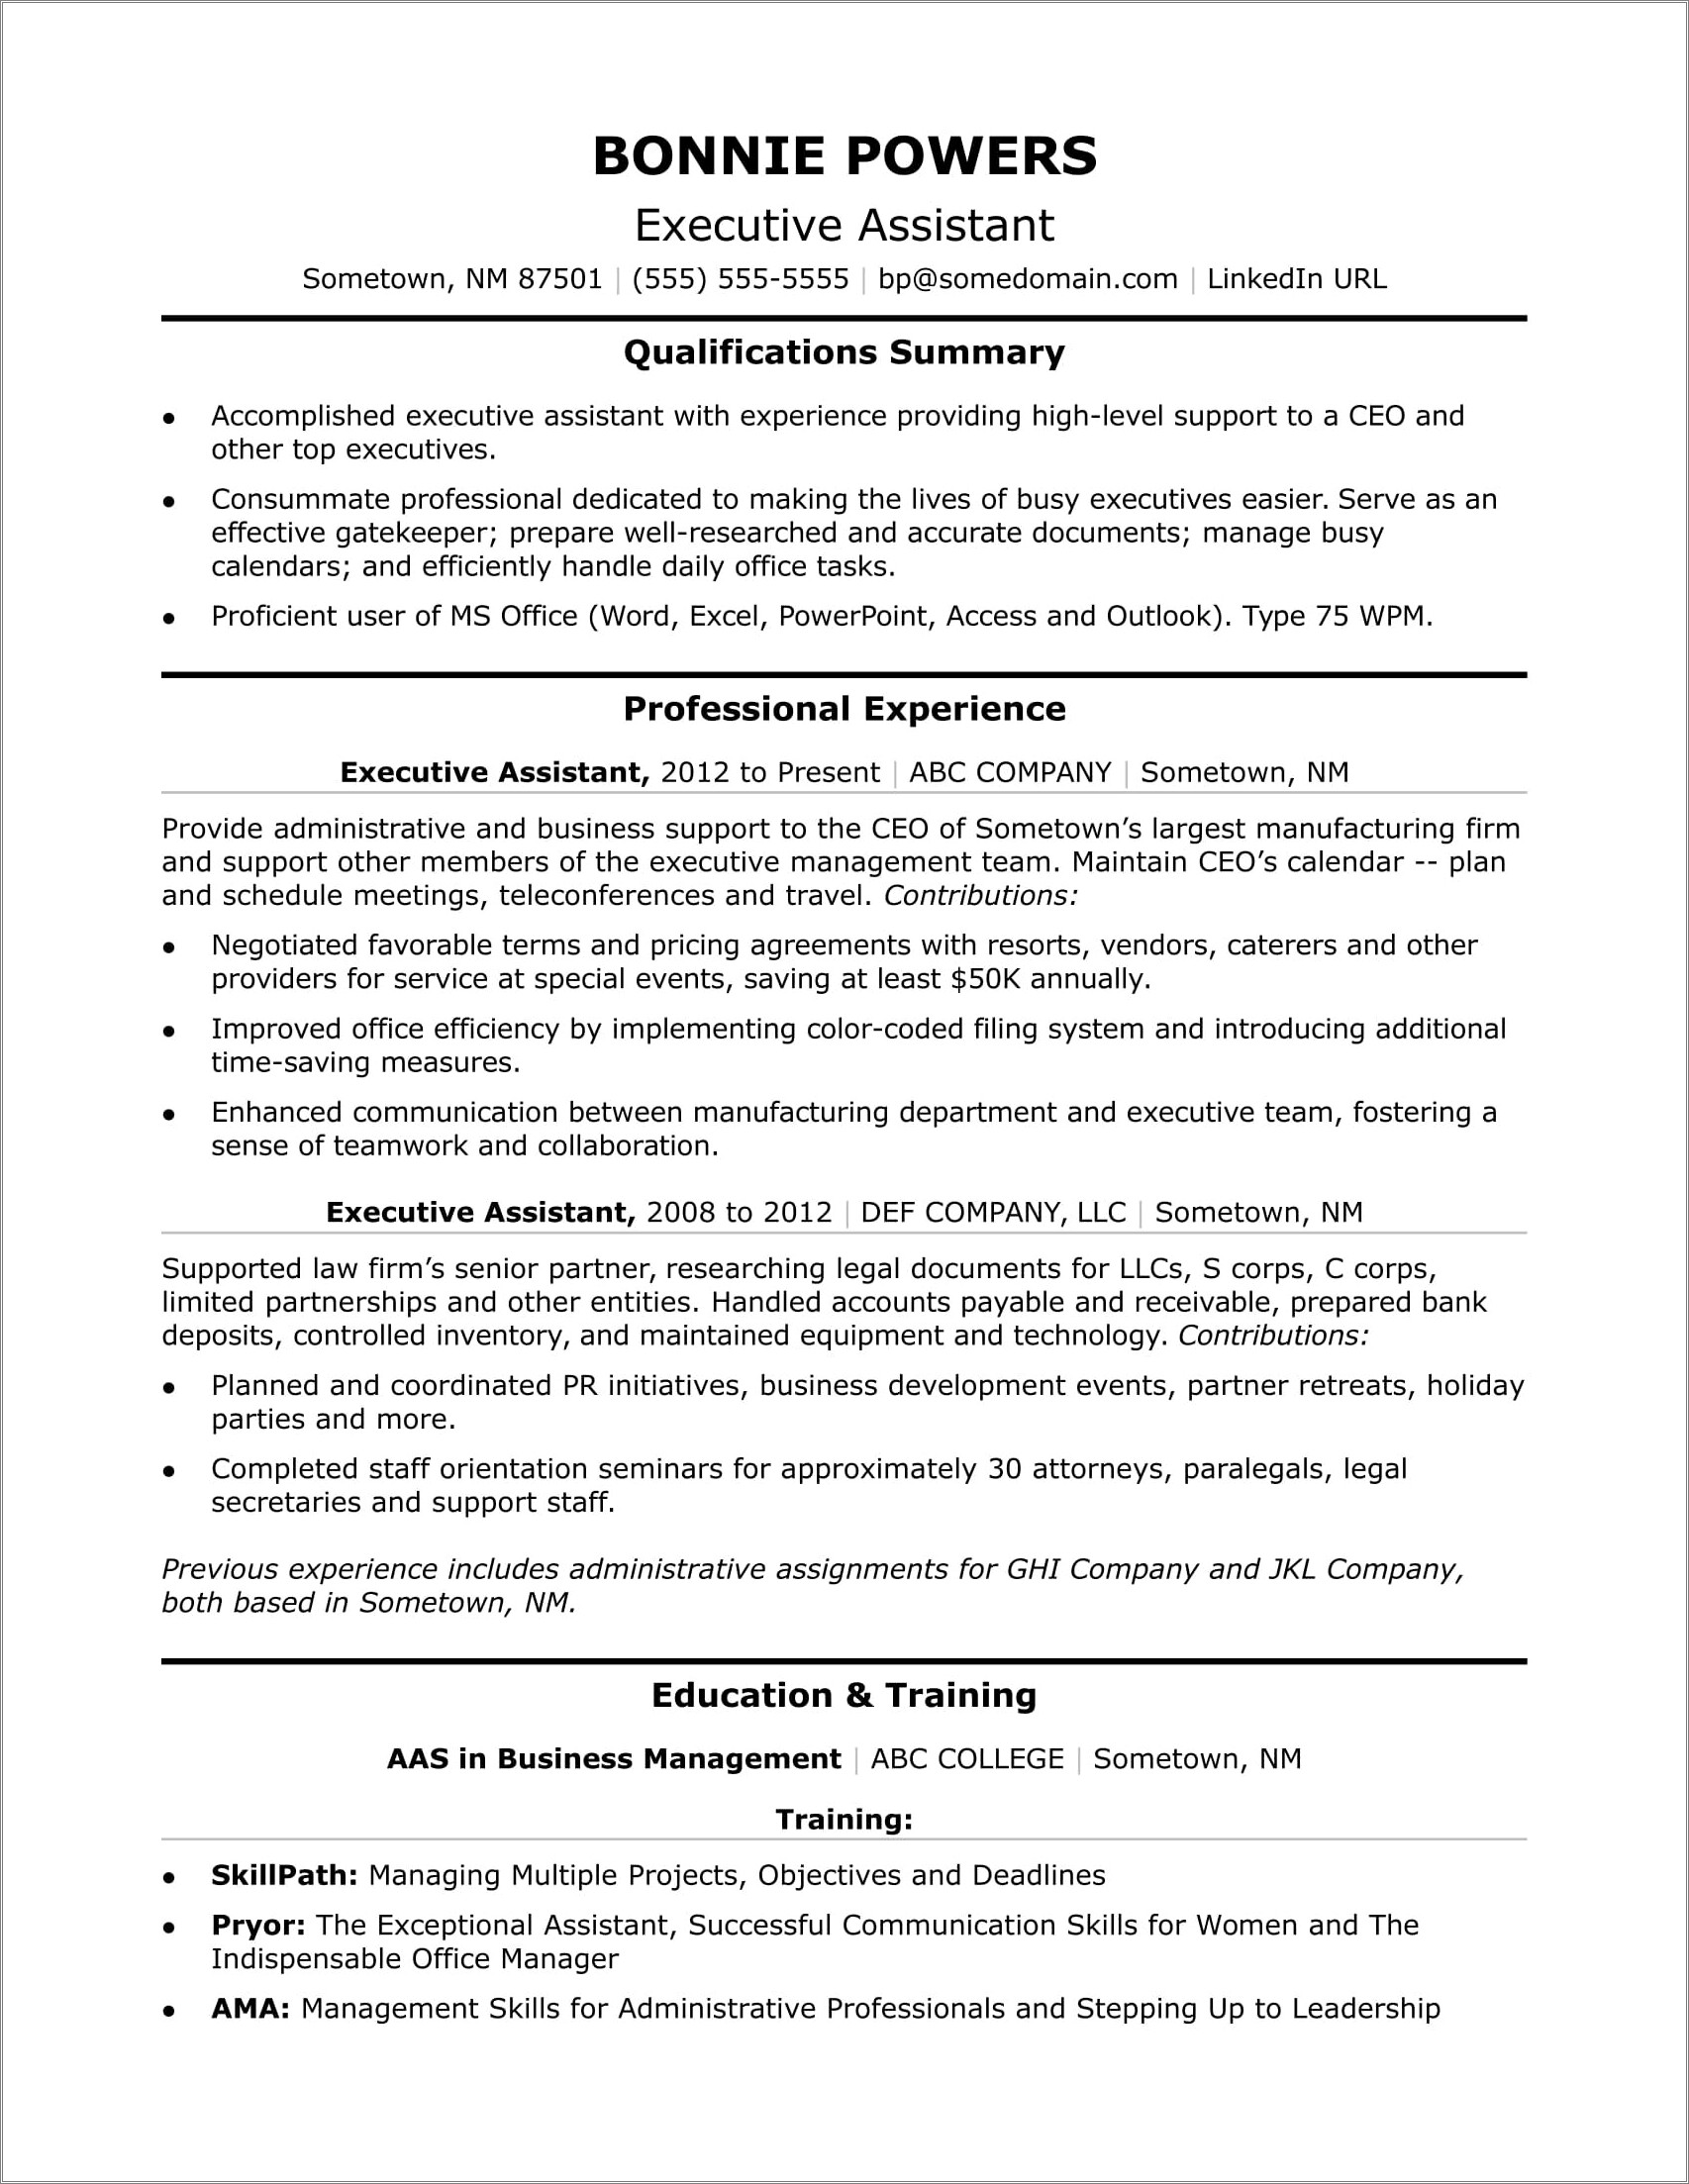 Best Companies To Help Write Executive Level Resumes